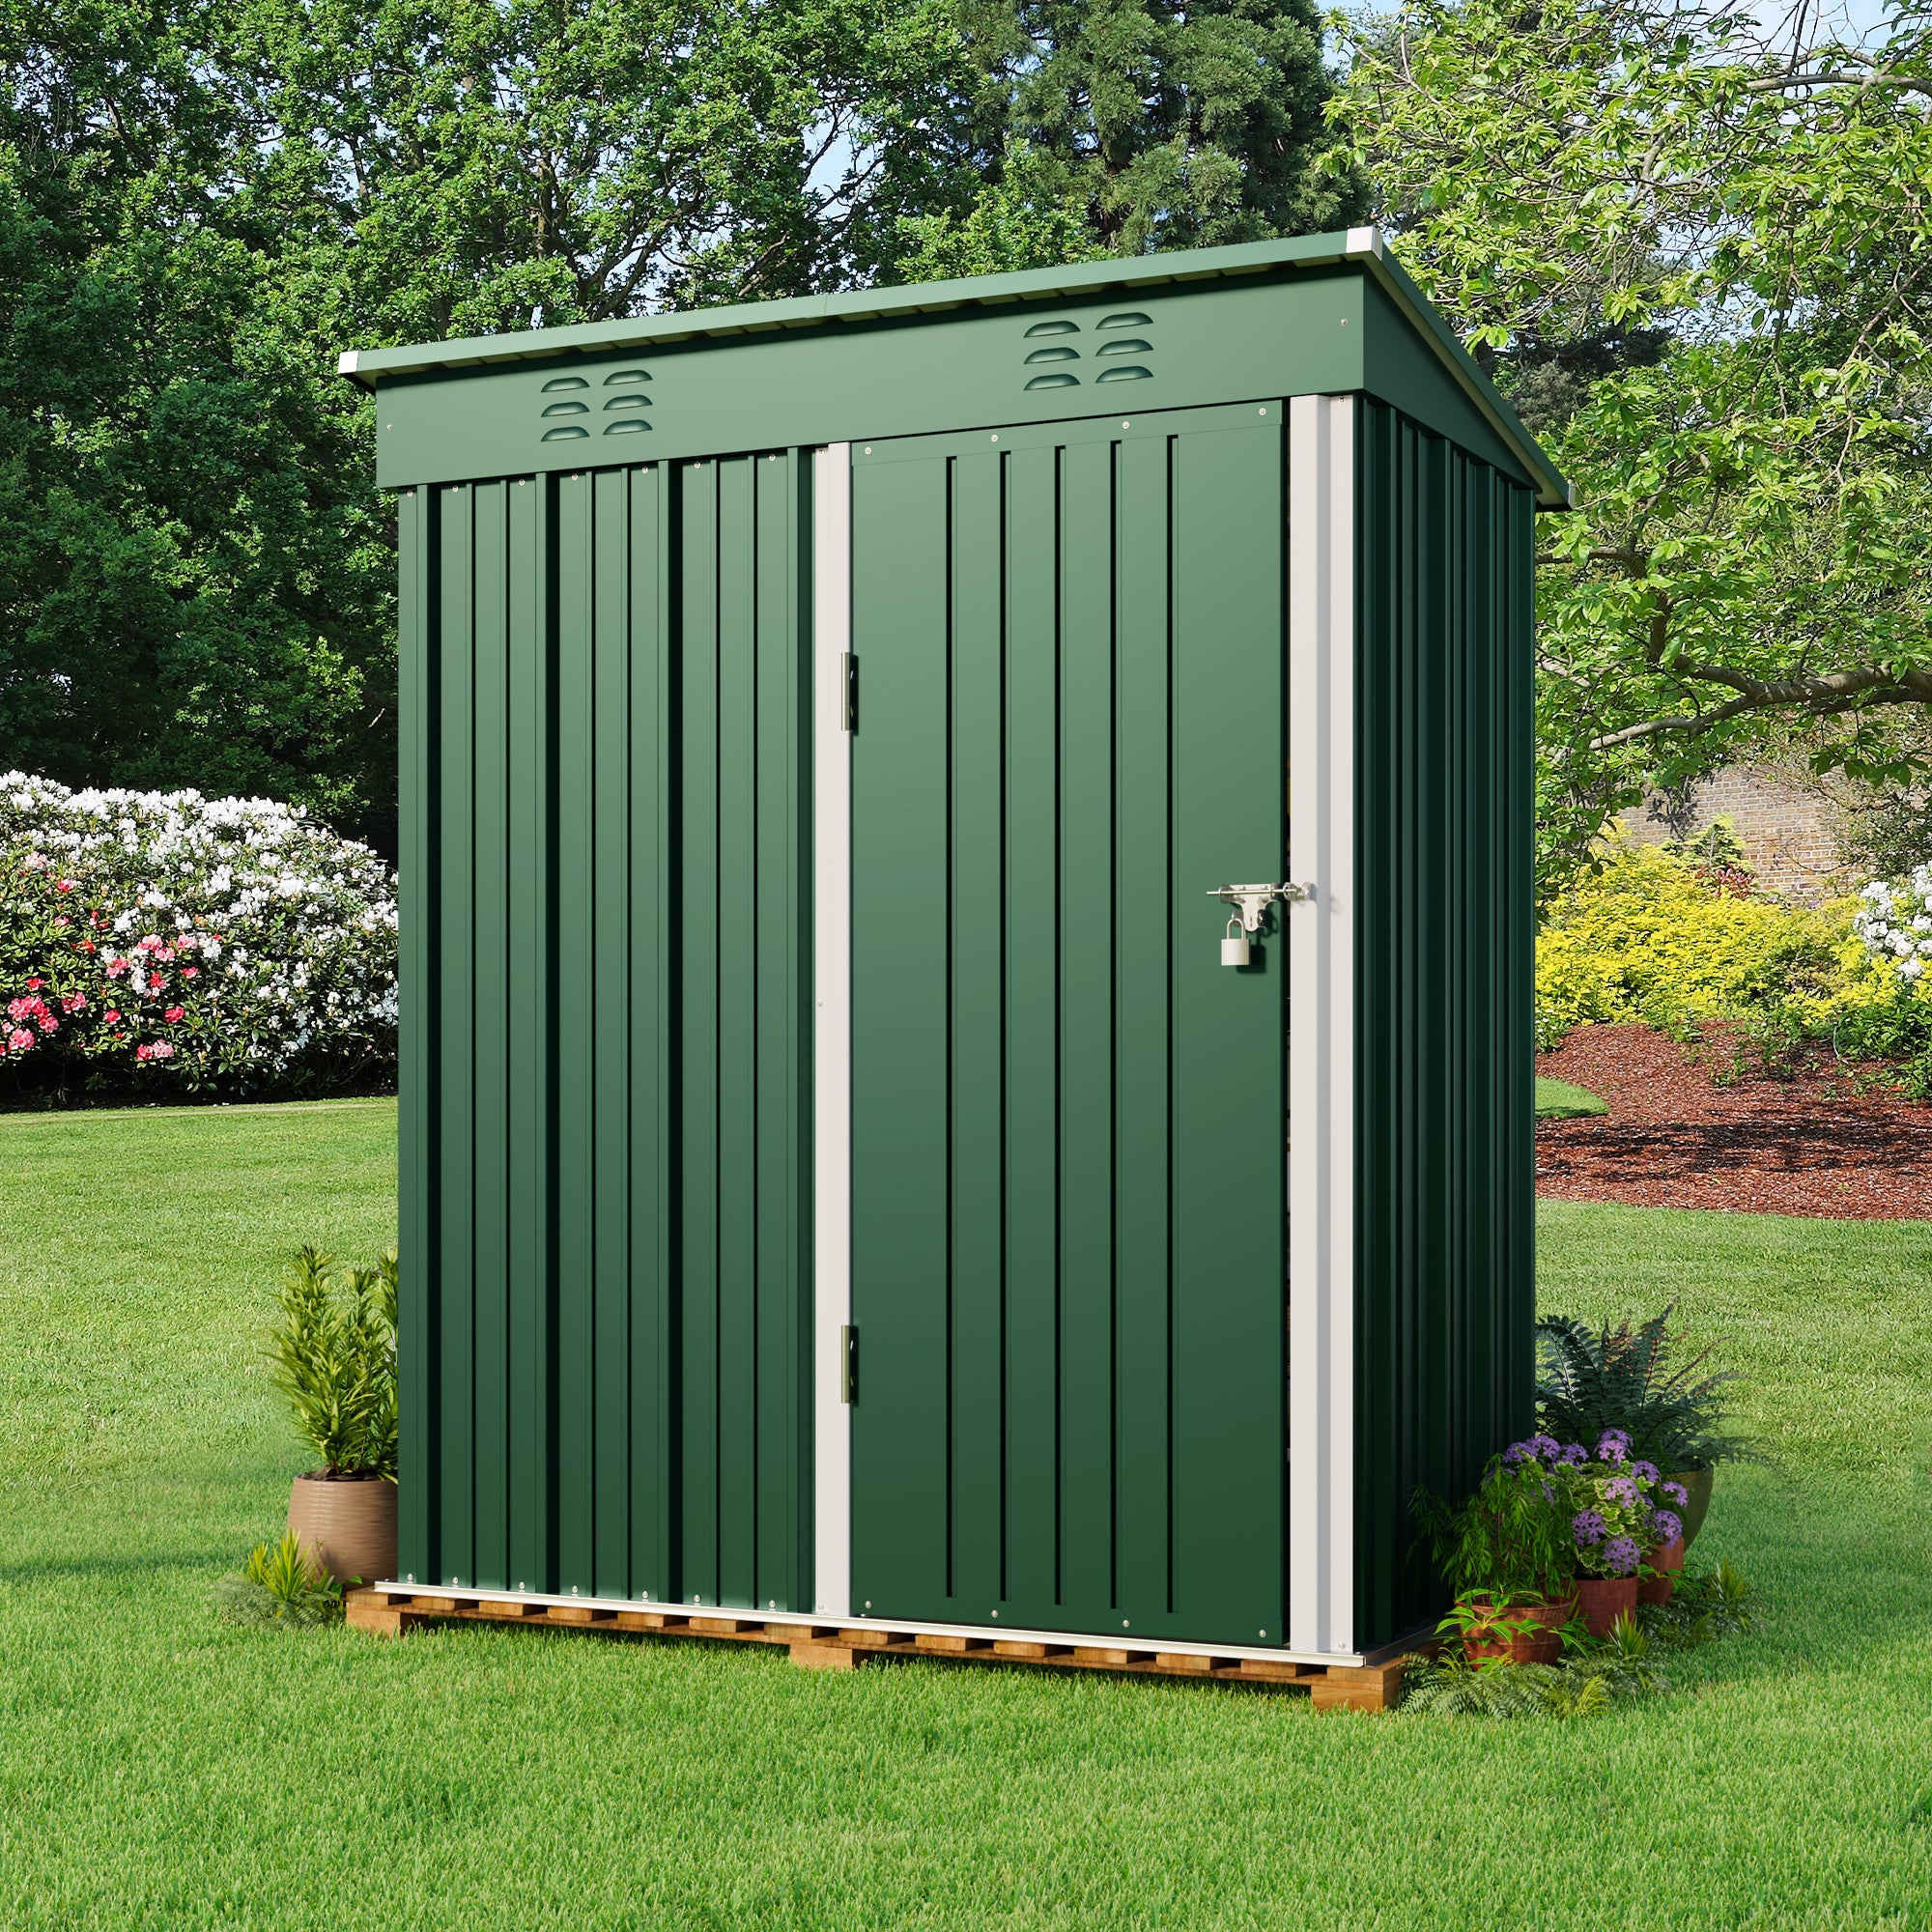 Gizoon CC20 Outdoor Metal Storage Shed with Lockable Doors  and Air Vent